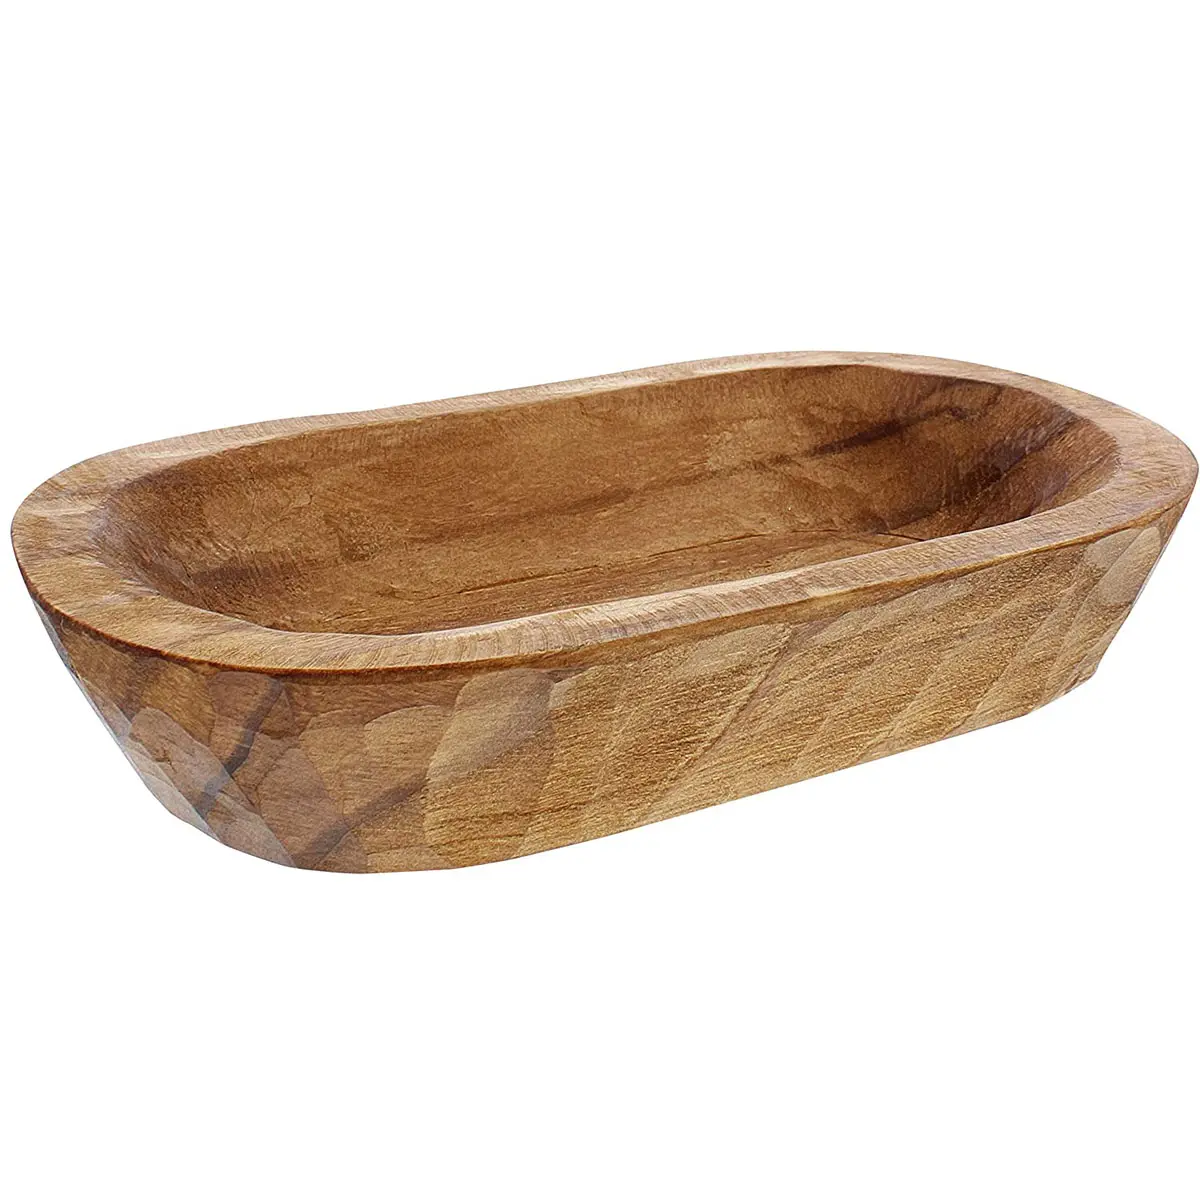 Mini Dough Bowl - For Decor or Display - Hand Carved 9.75 Inches Long For Fruit, Bread, Moss and Rattan Wicke